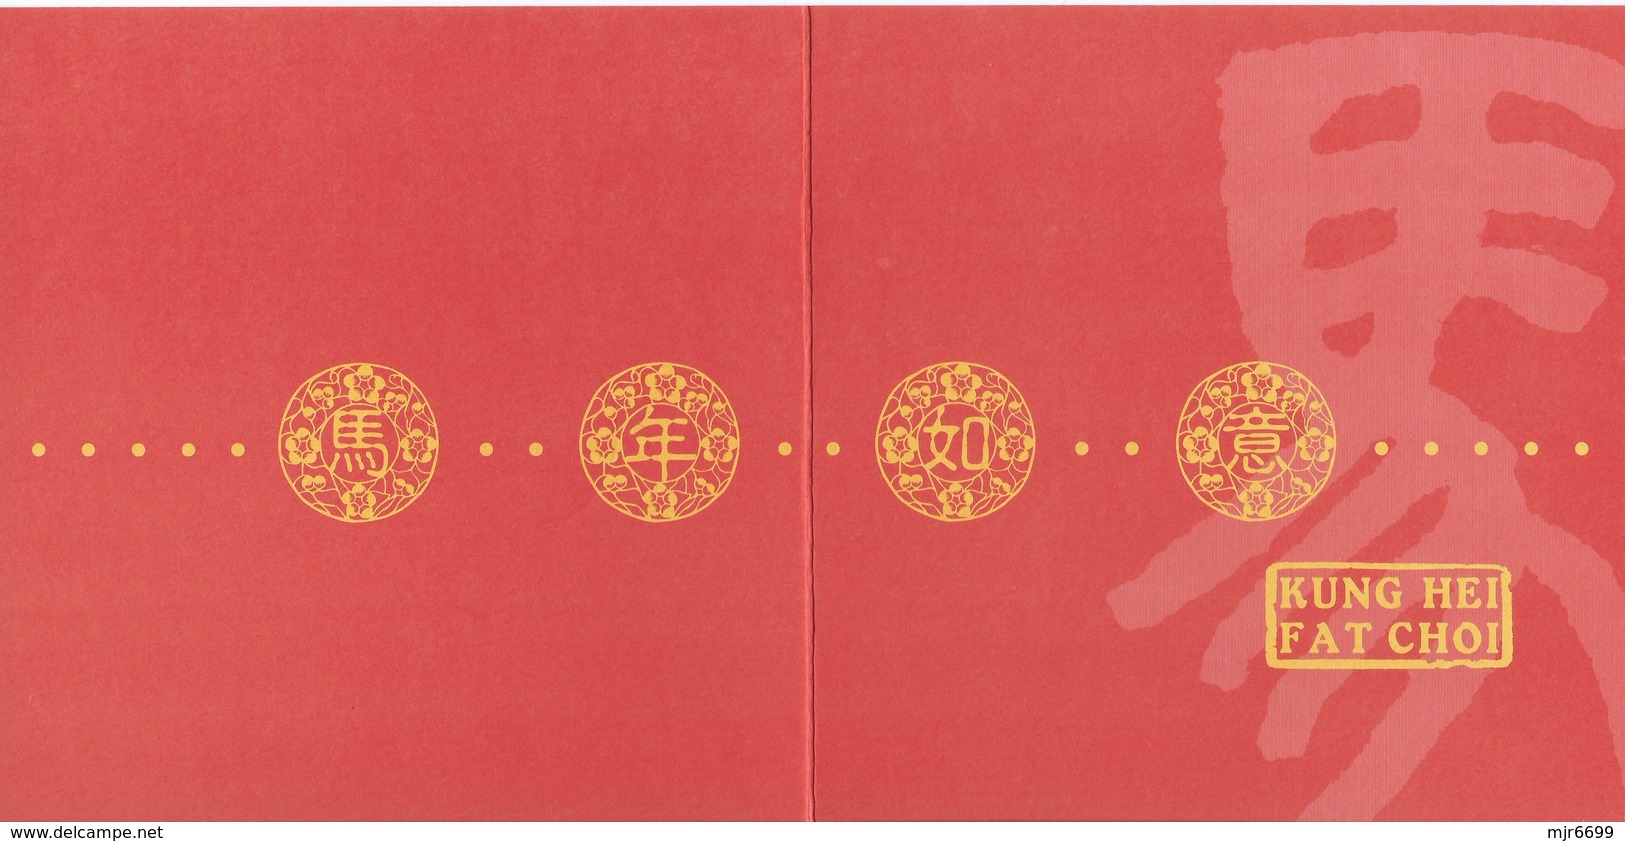 MACAU 2002 LUNAR NEW YEAR OF THE HORSE GREETING CARD & POSTAGE PAID COVER, LOCAL USAGE,  POST OFFICE CODE #BPD003 - Interi Postali